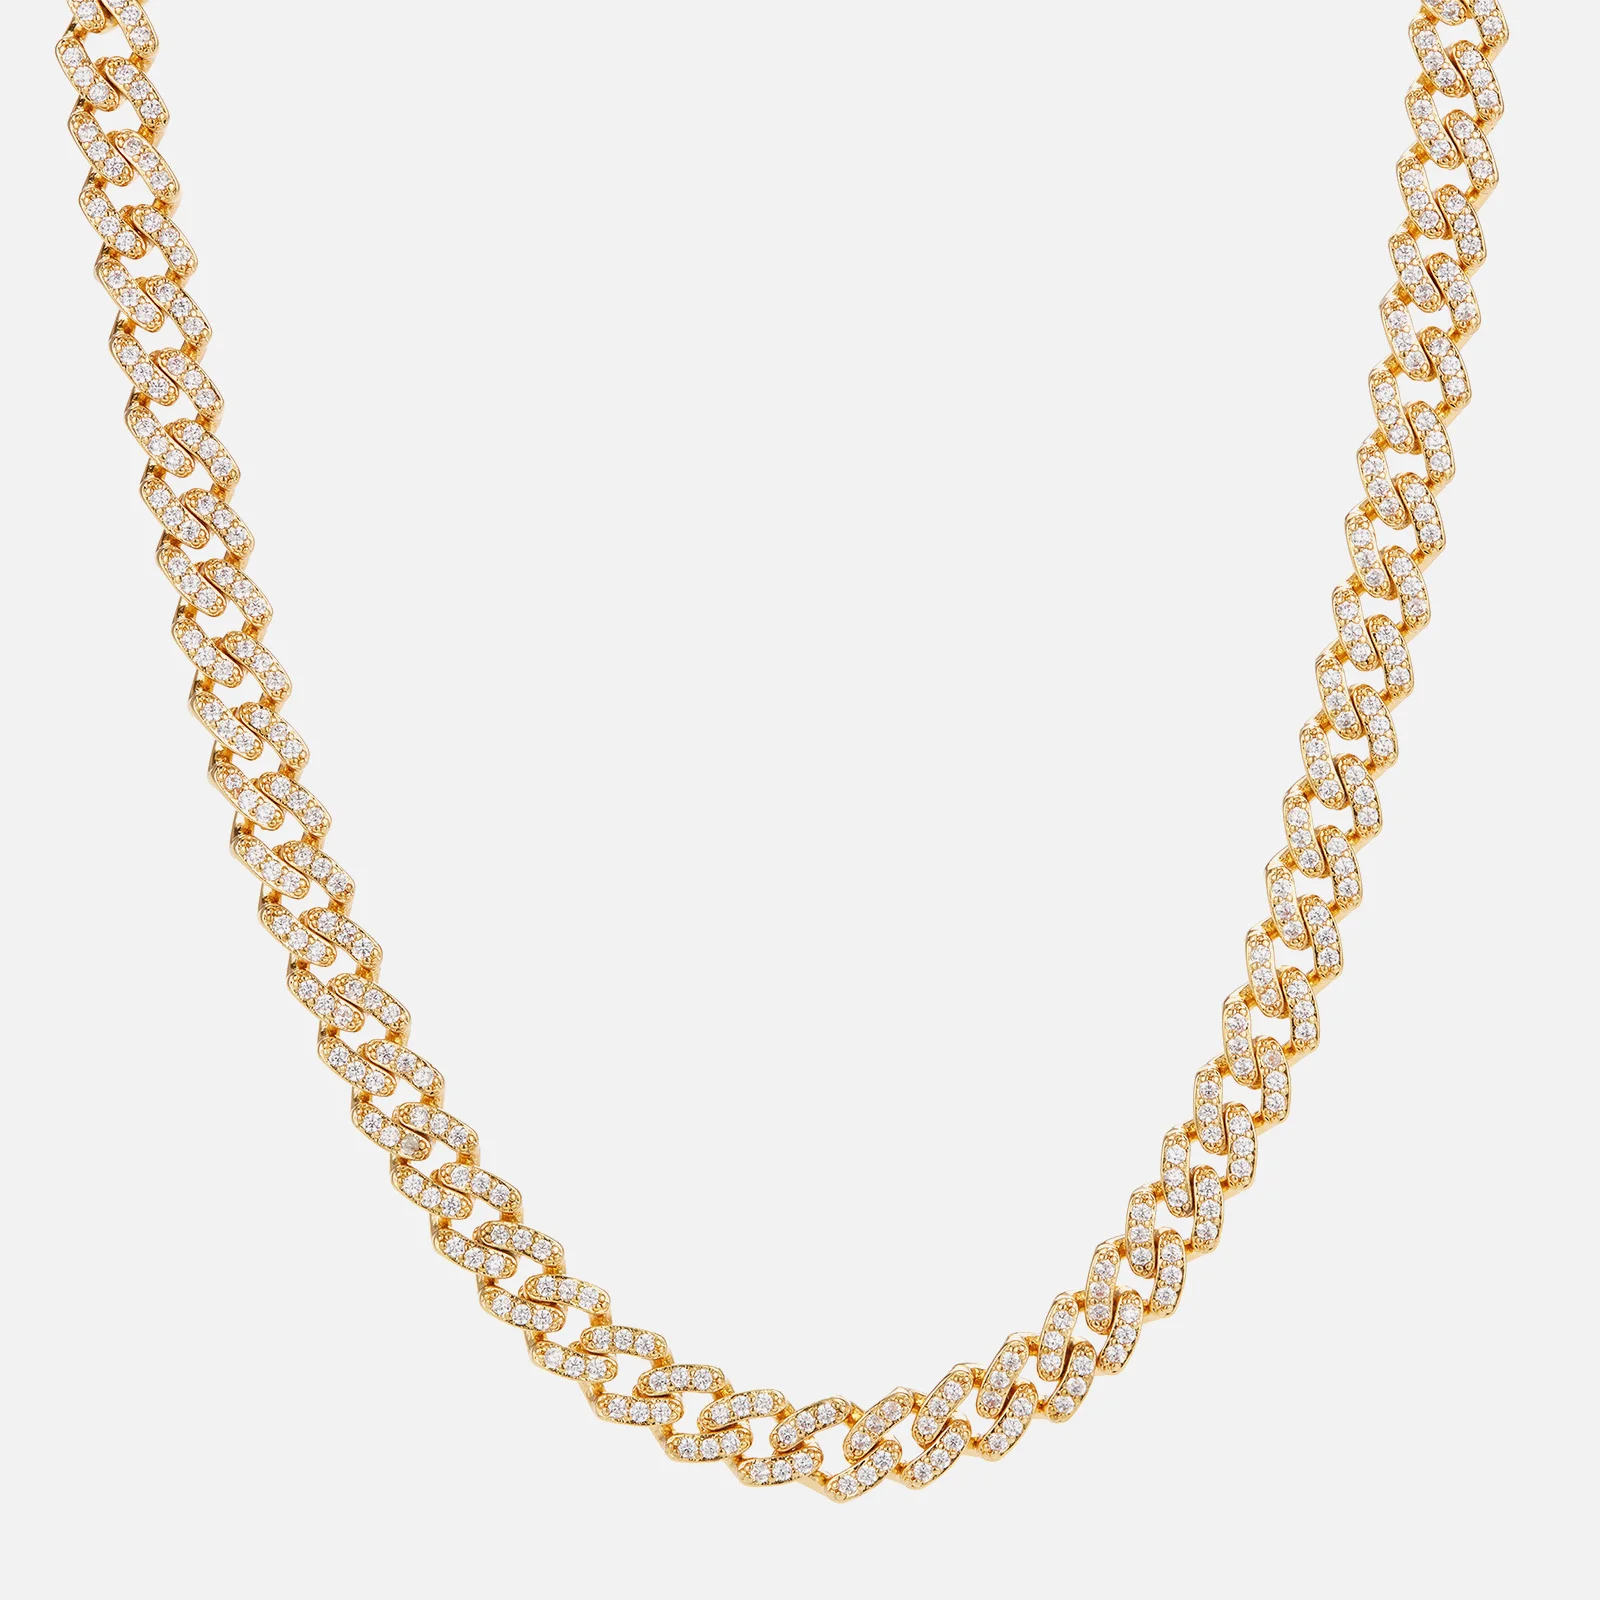 Crystal Haze Women's Mexican Chain - Gold Image 1